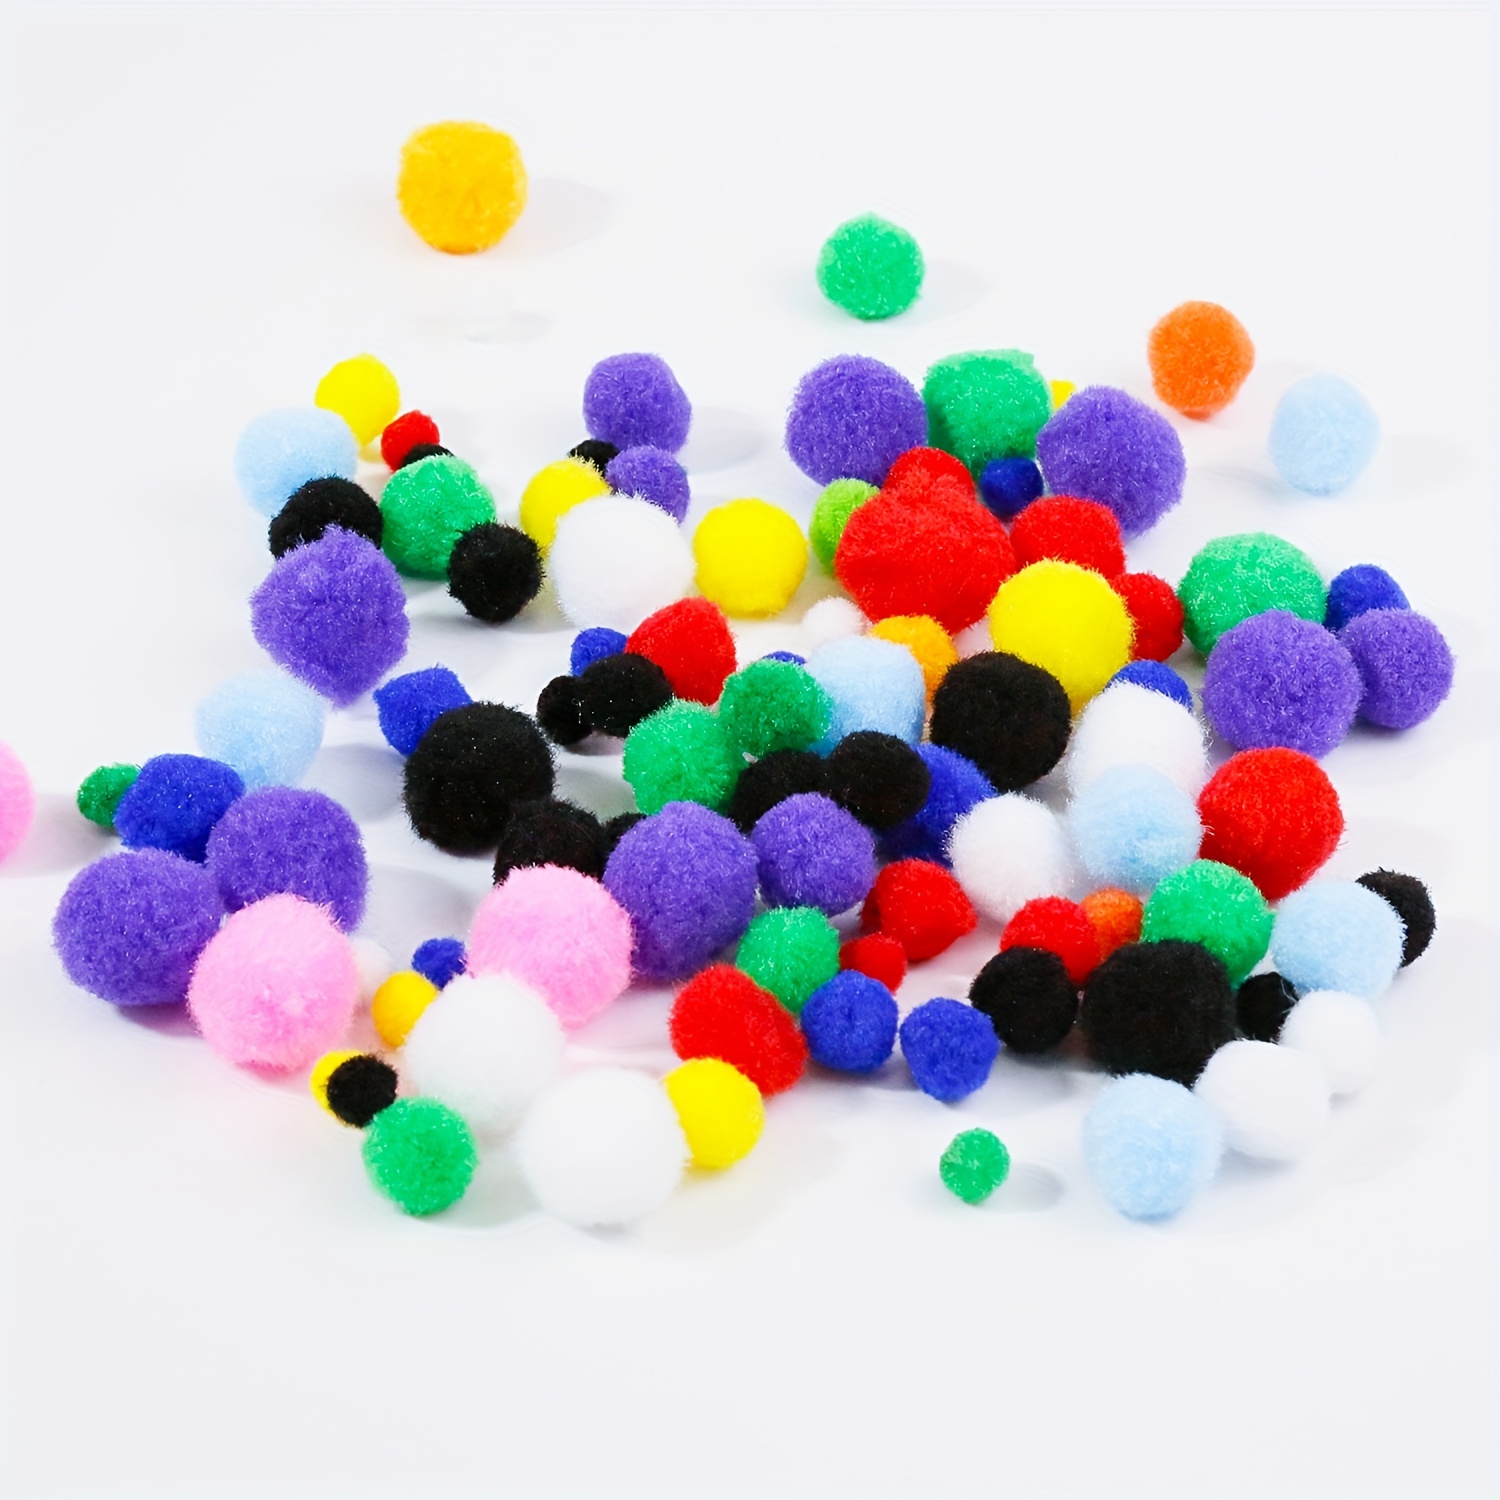 100pcs Craft Pom Poms – Multicolor Bulk Pom Poms Arts And Crafts, Pompoms  For Crafts In Assorted Size- Soft And Fluffy Puff Balls, 0.4inch/0.6inch/0.8